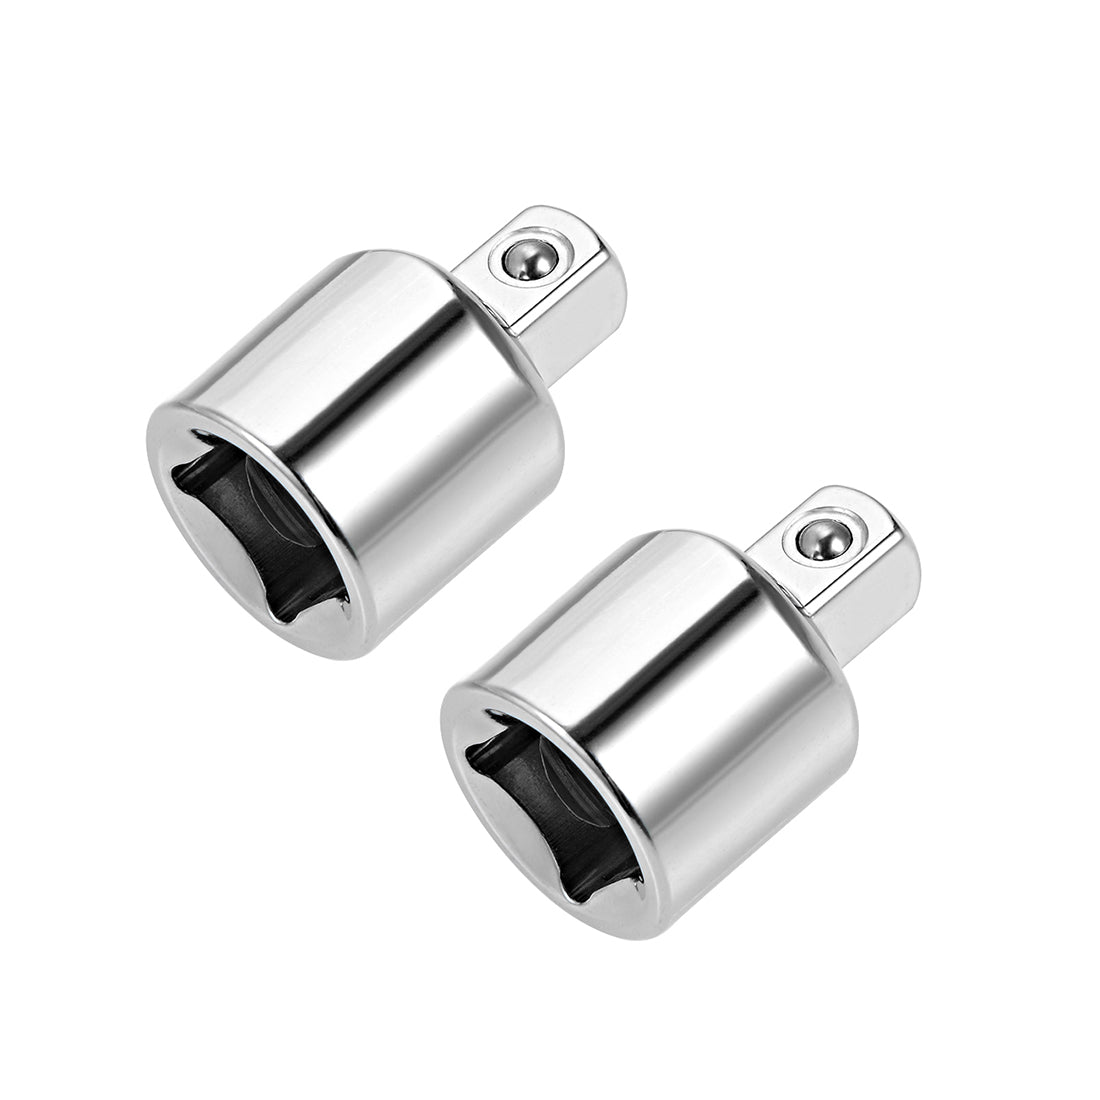 uxcell Uxcell 2 Pcs 3/8" Drive F x 1/4" M Socket Reducer for Ratchet Wrenches, Female to Male